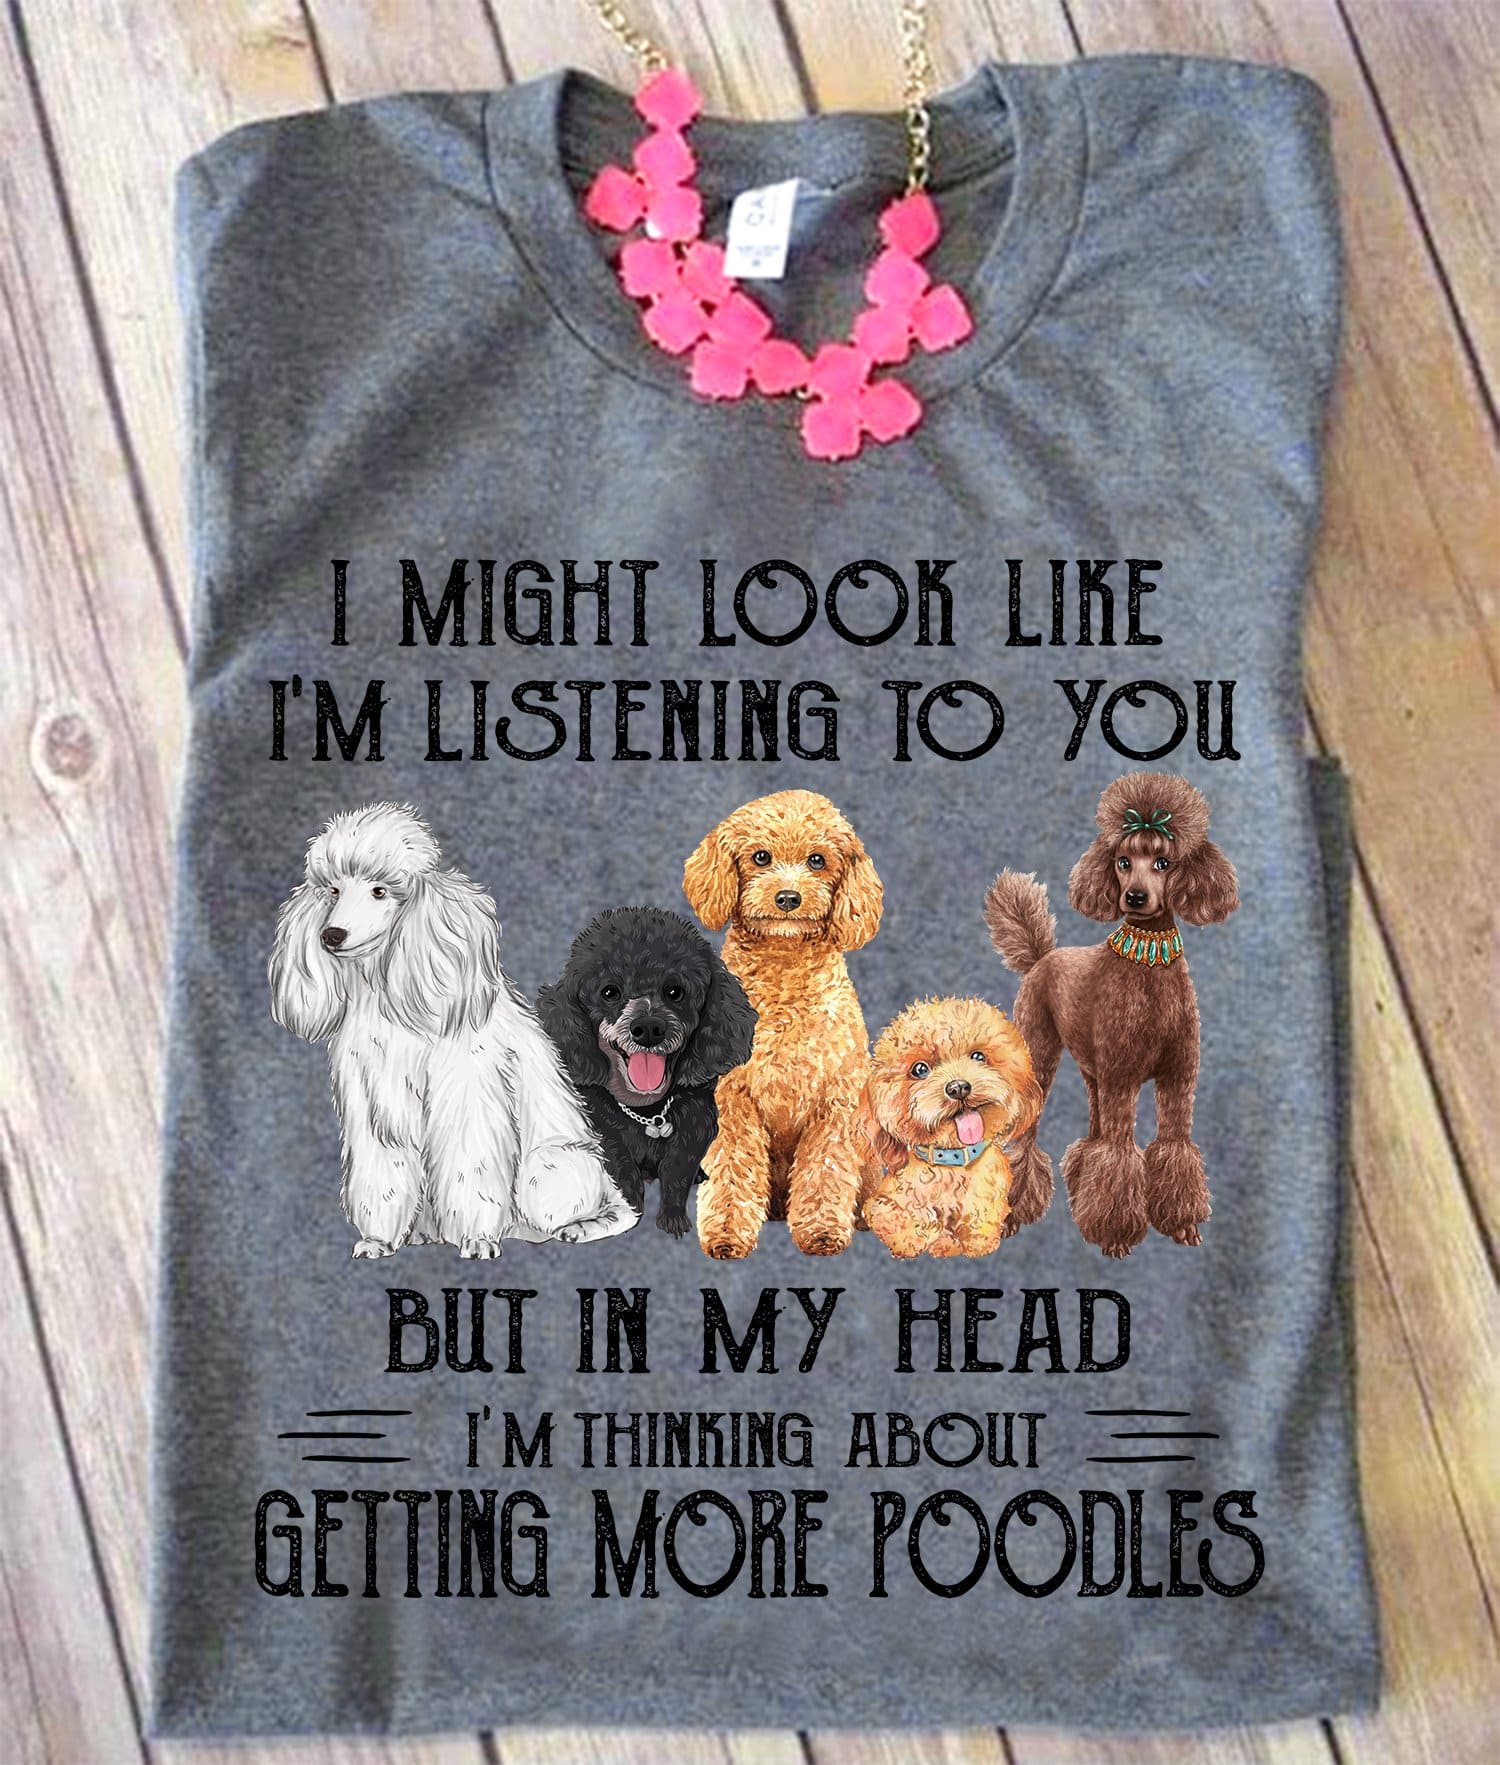 Poodles Graphic T-shirt - I might look like i'm listening to you but in my head i'm thinking about getting more poodles